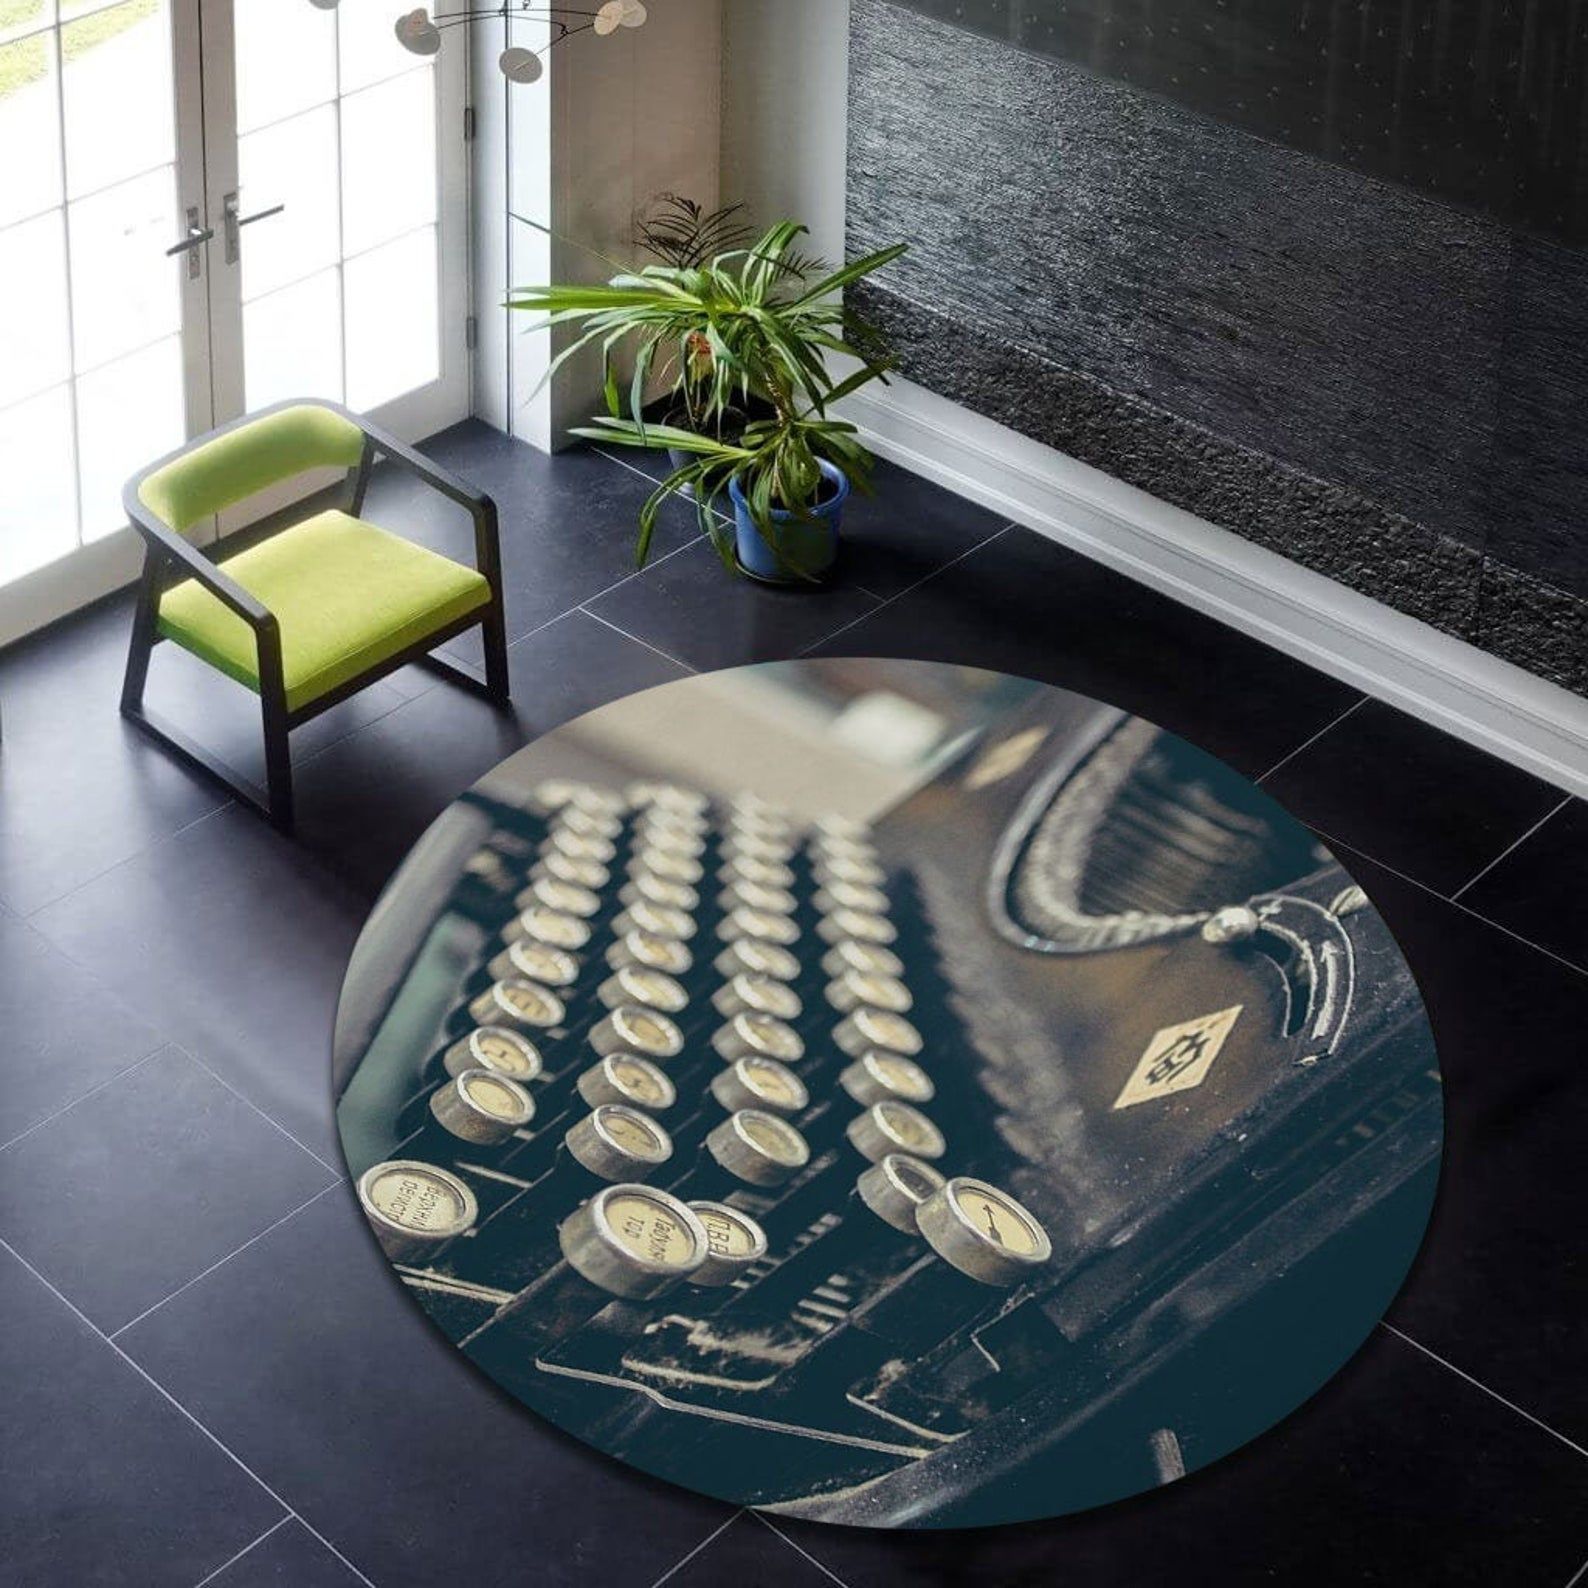 An image of a modern space with dark tile floors, a green rug, and a plant. At the center of the room is a large round rug featuring a close up of typewriter keys.